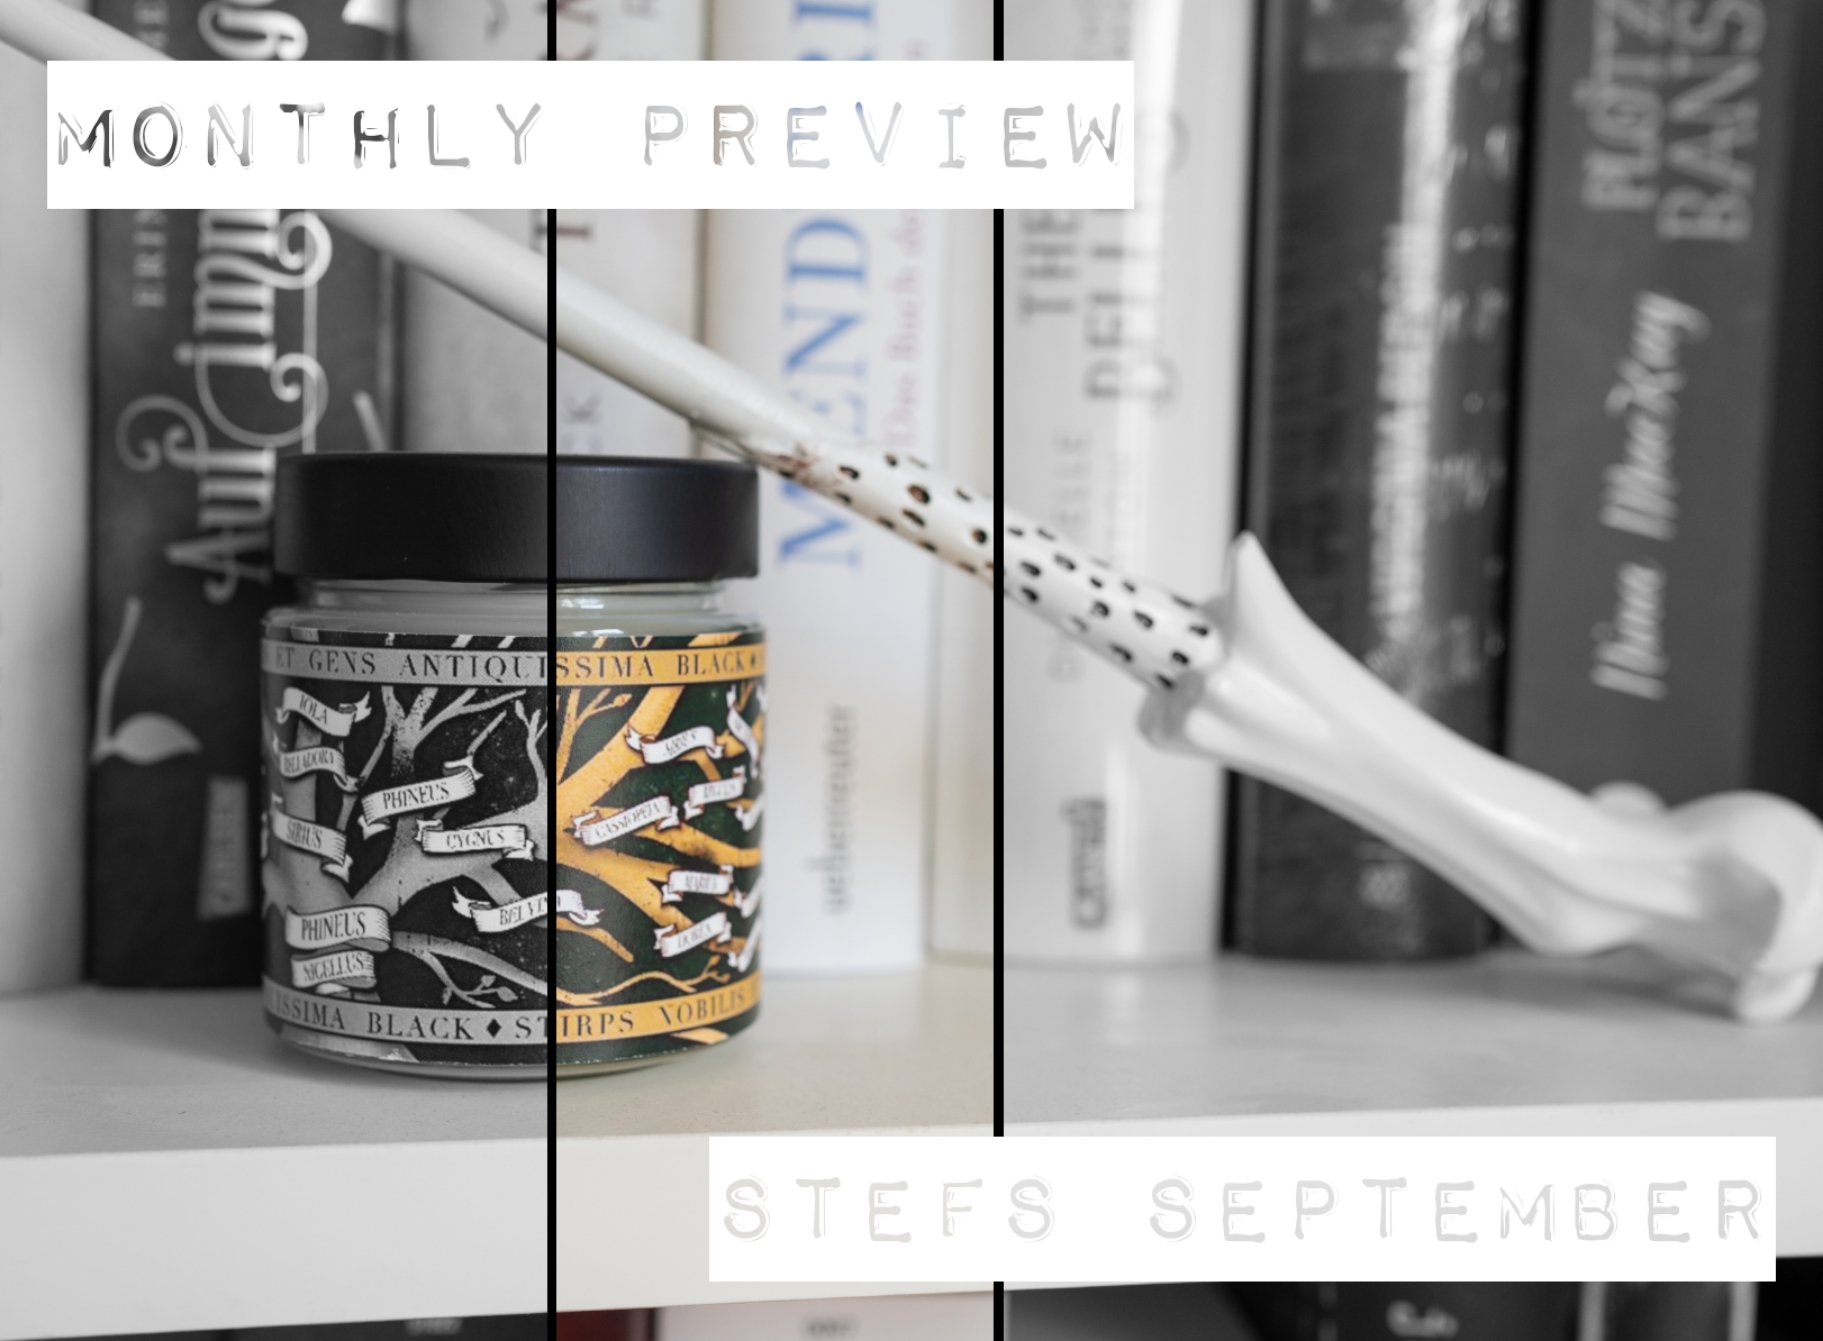 Monthly Preview – Stefs September graphic